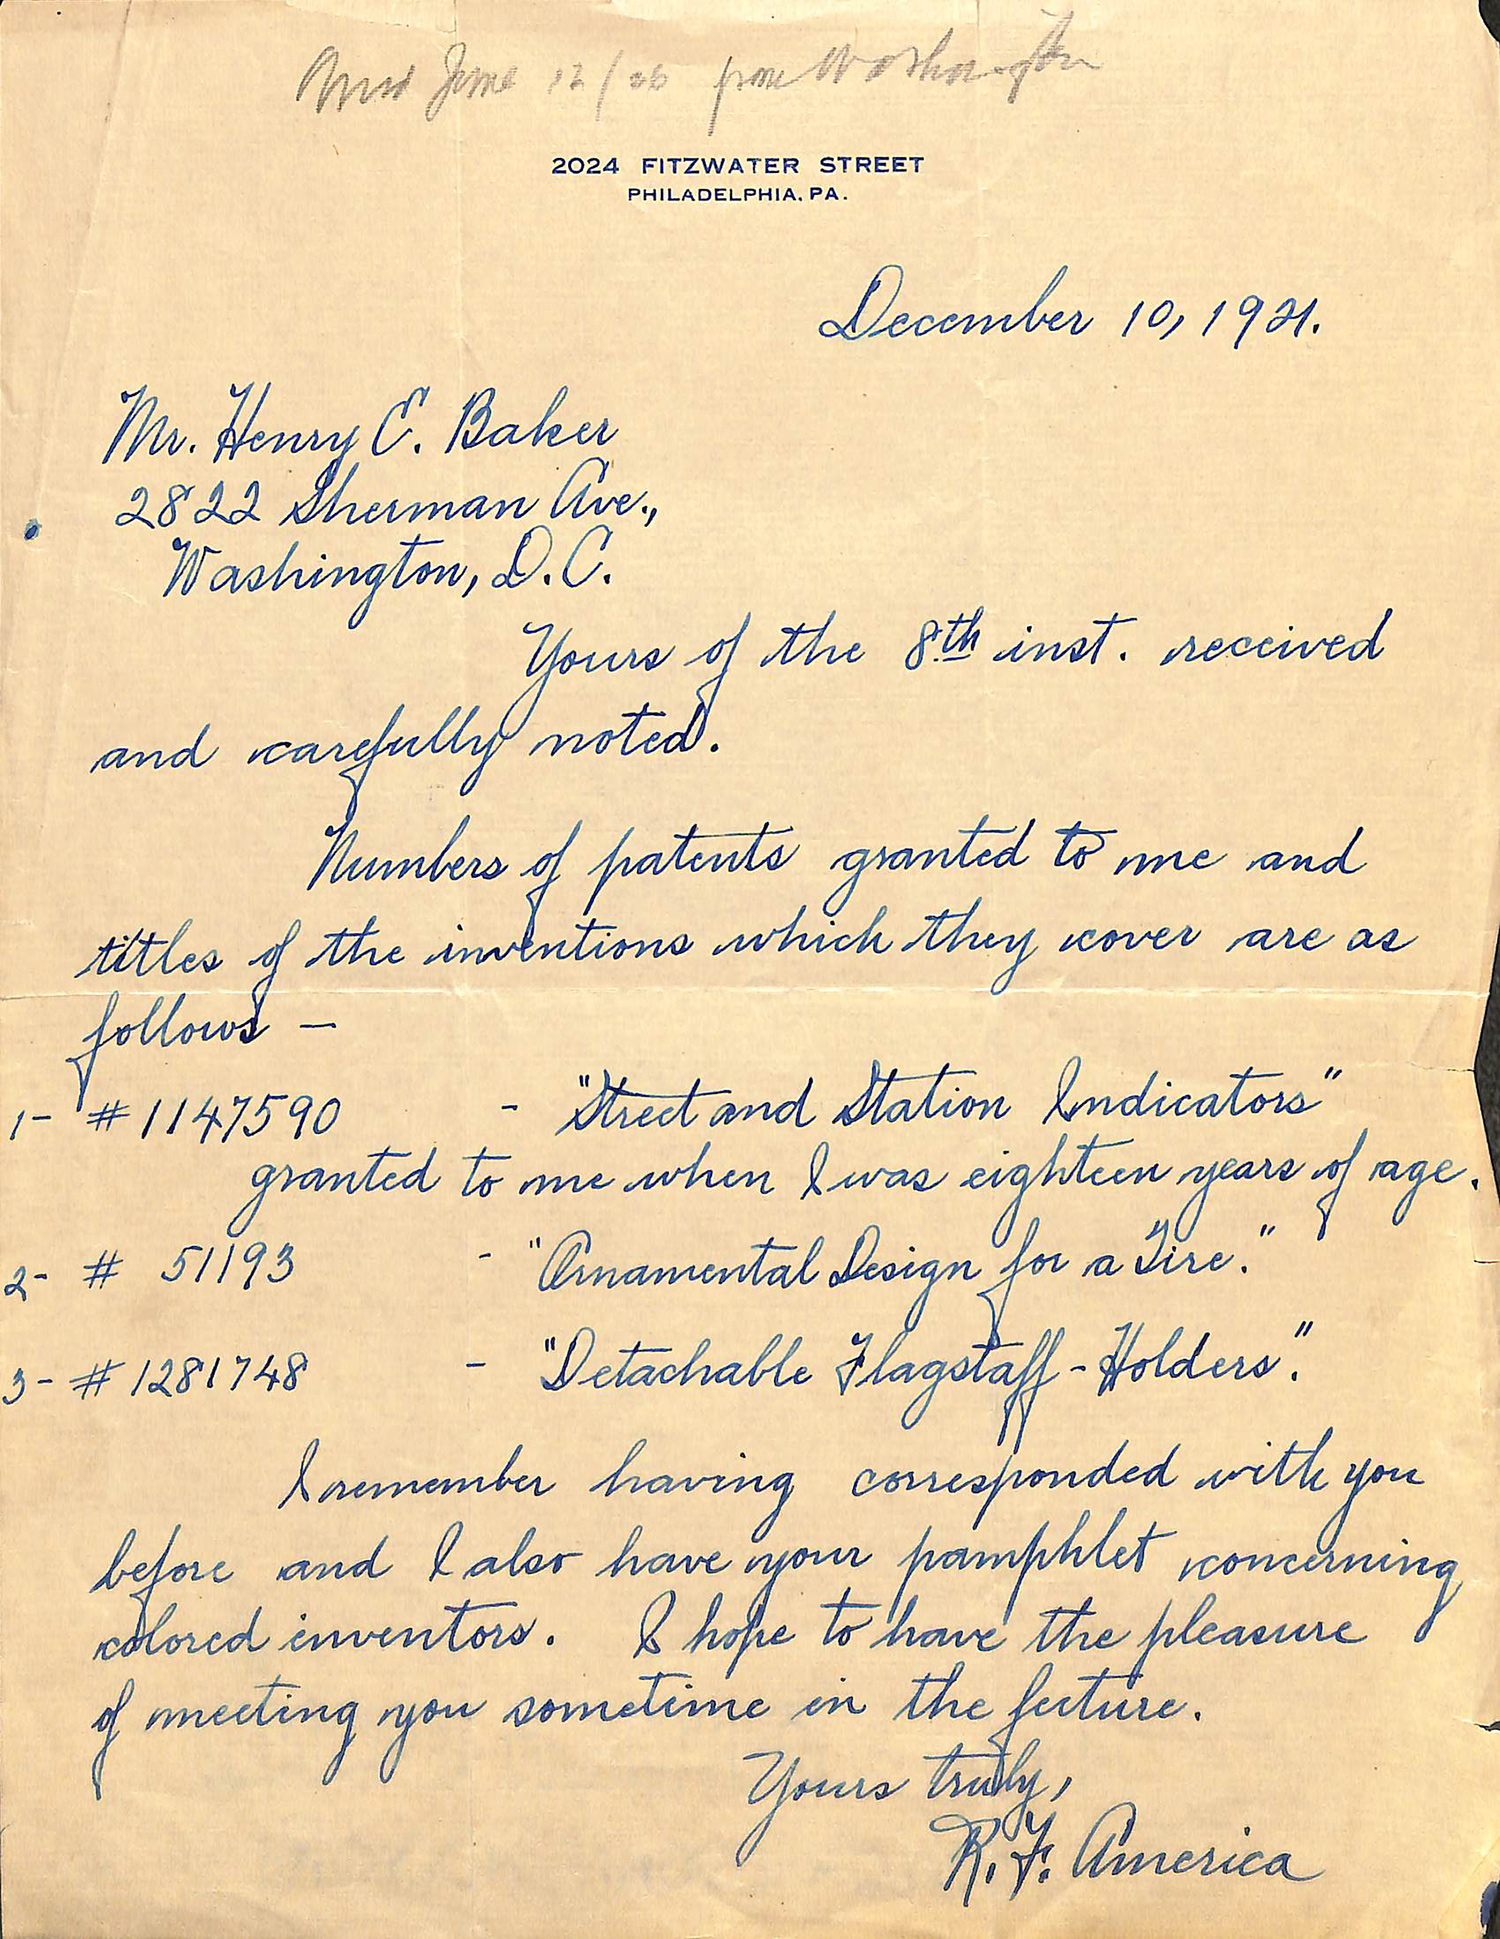 A handwritten letter from R.F. America to Henry Baker from December 10, 1921 listing three patents: nos. 1,147,590, D511,193, and 1,281,748.